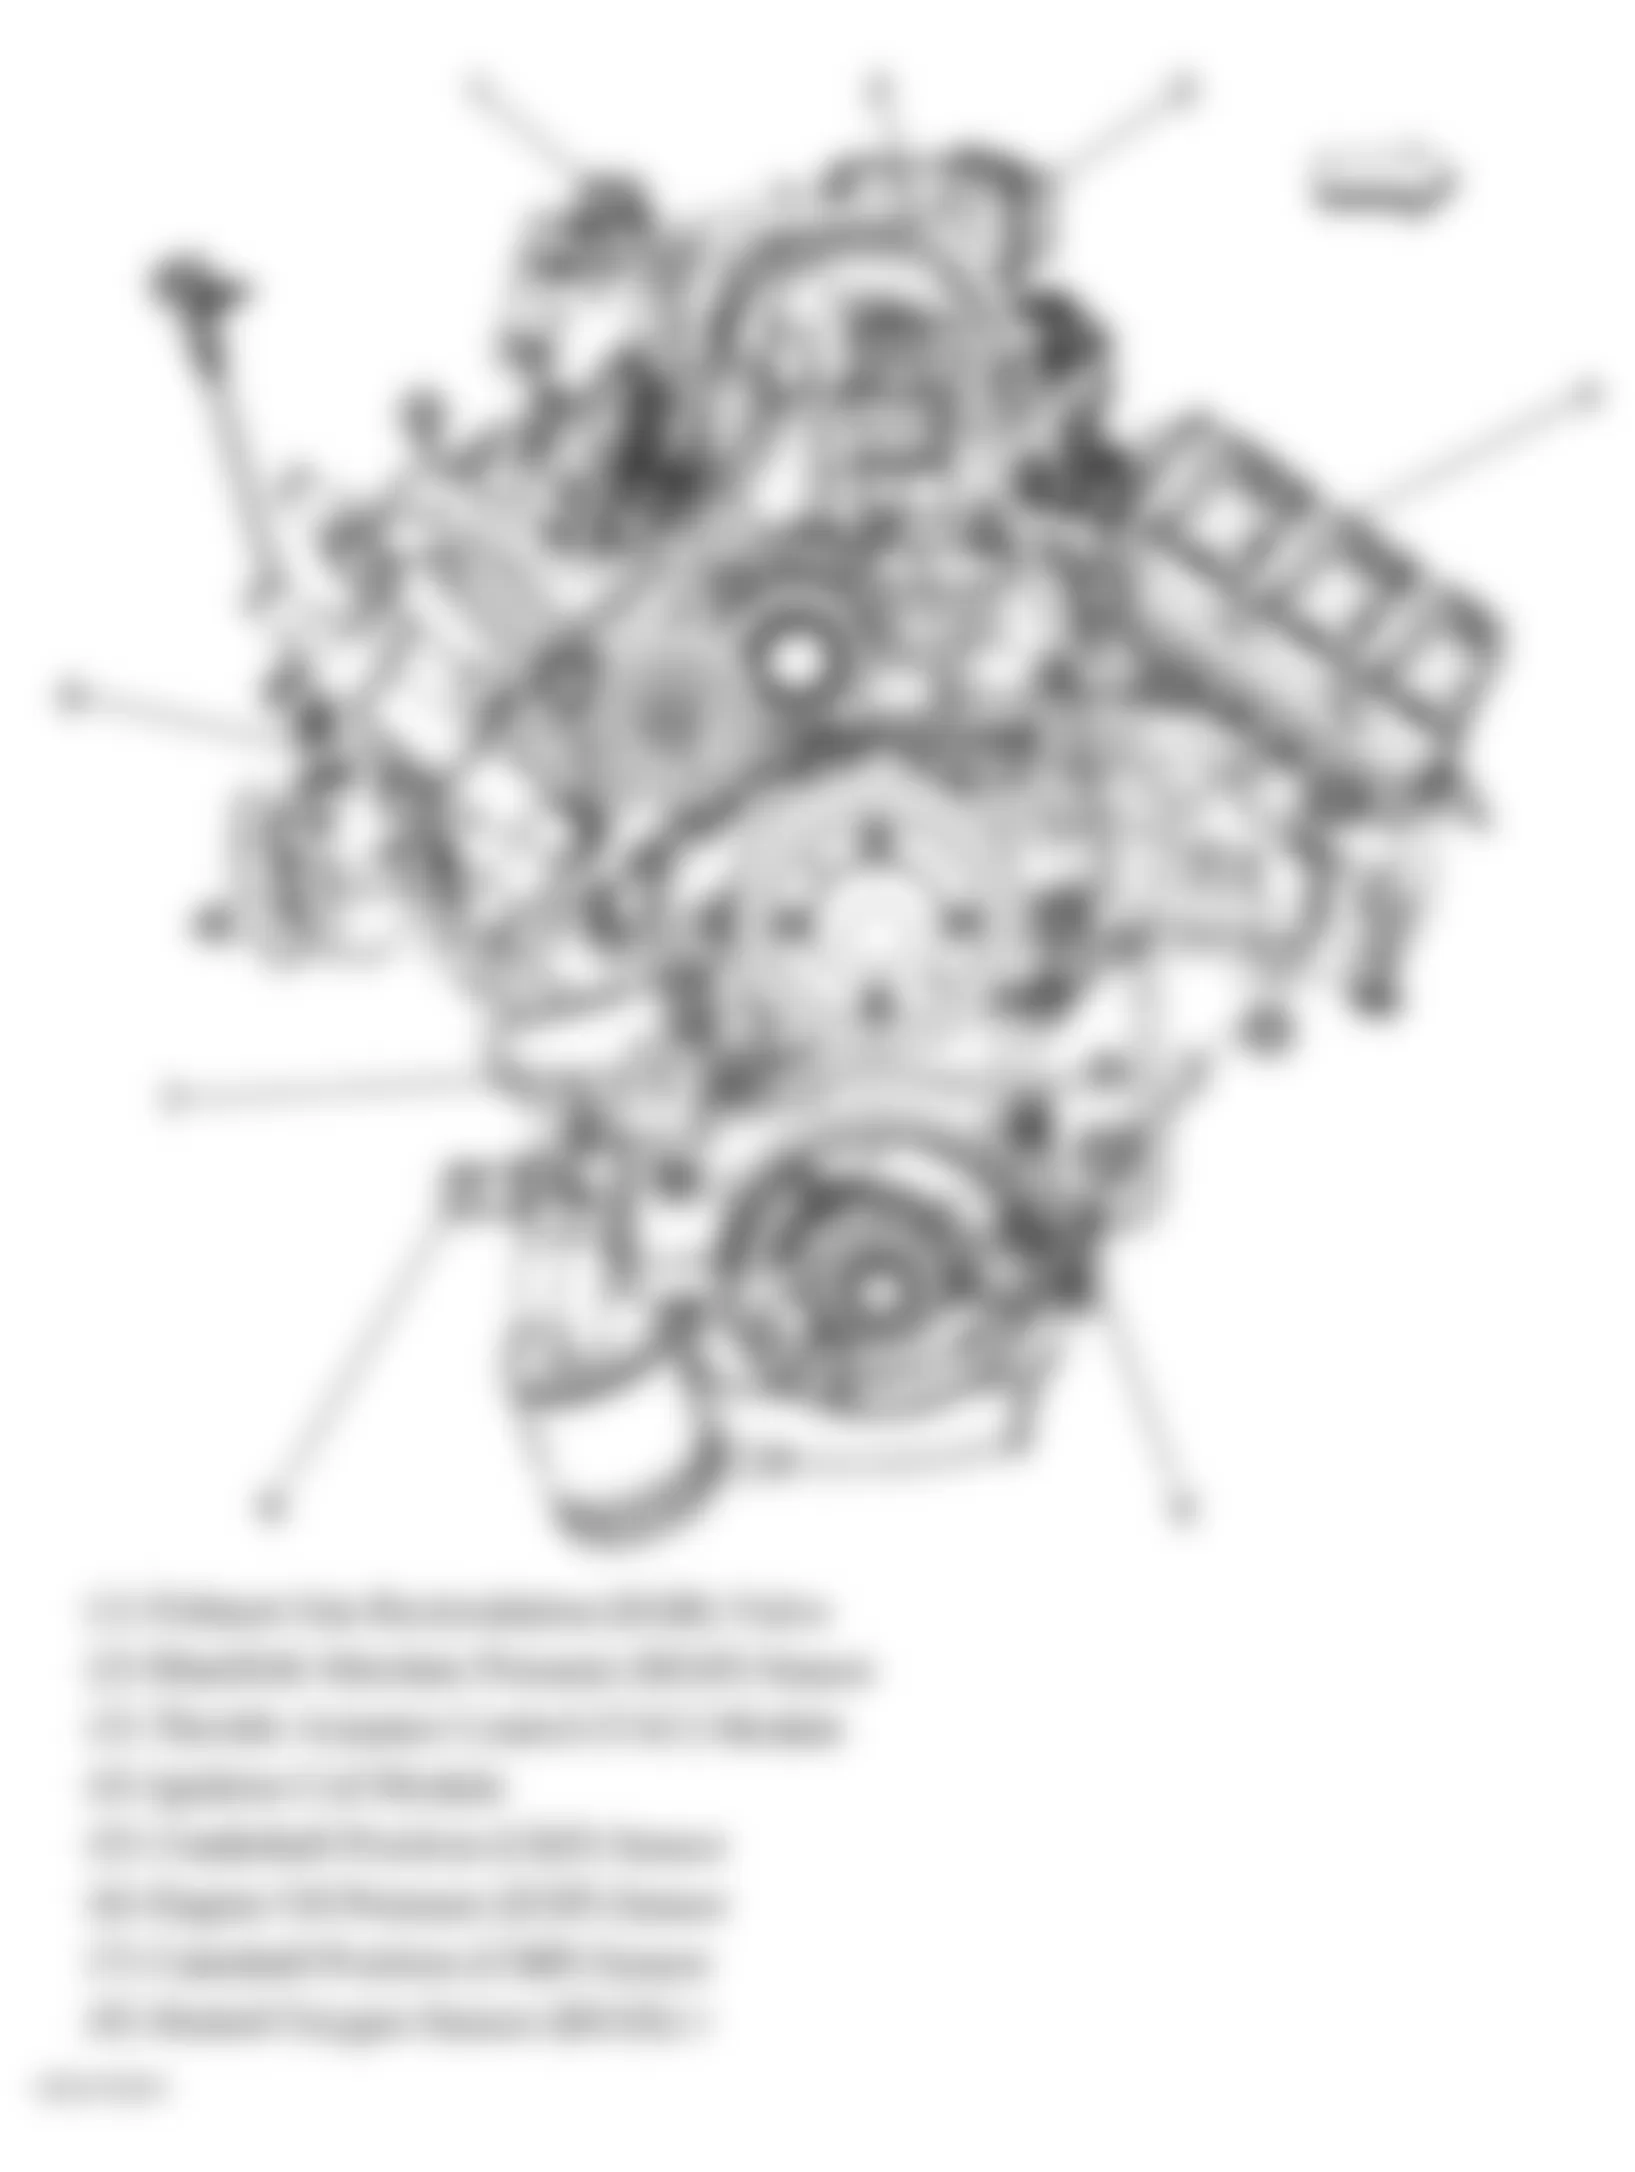 Buick Lucerne CXL 2006 - Component Locations -  Front Of Engine (3.8L)